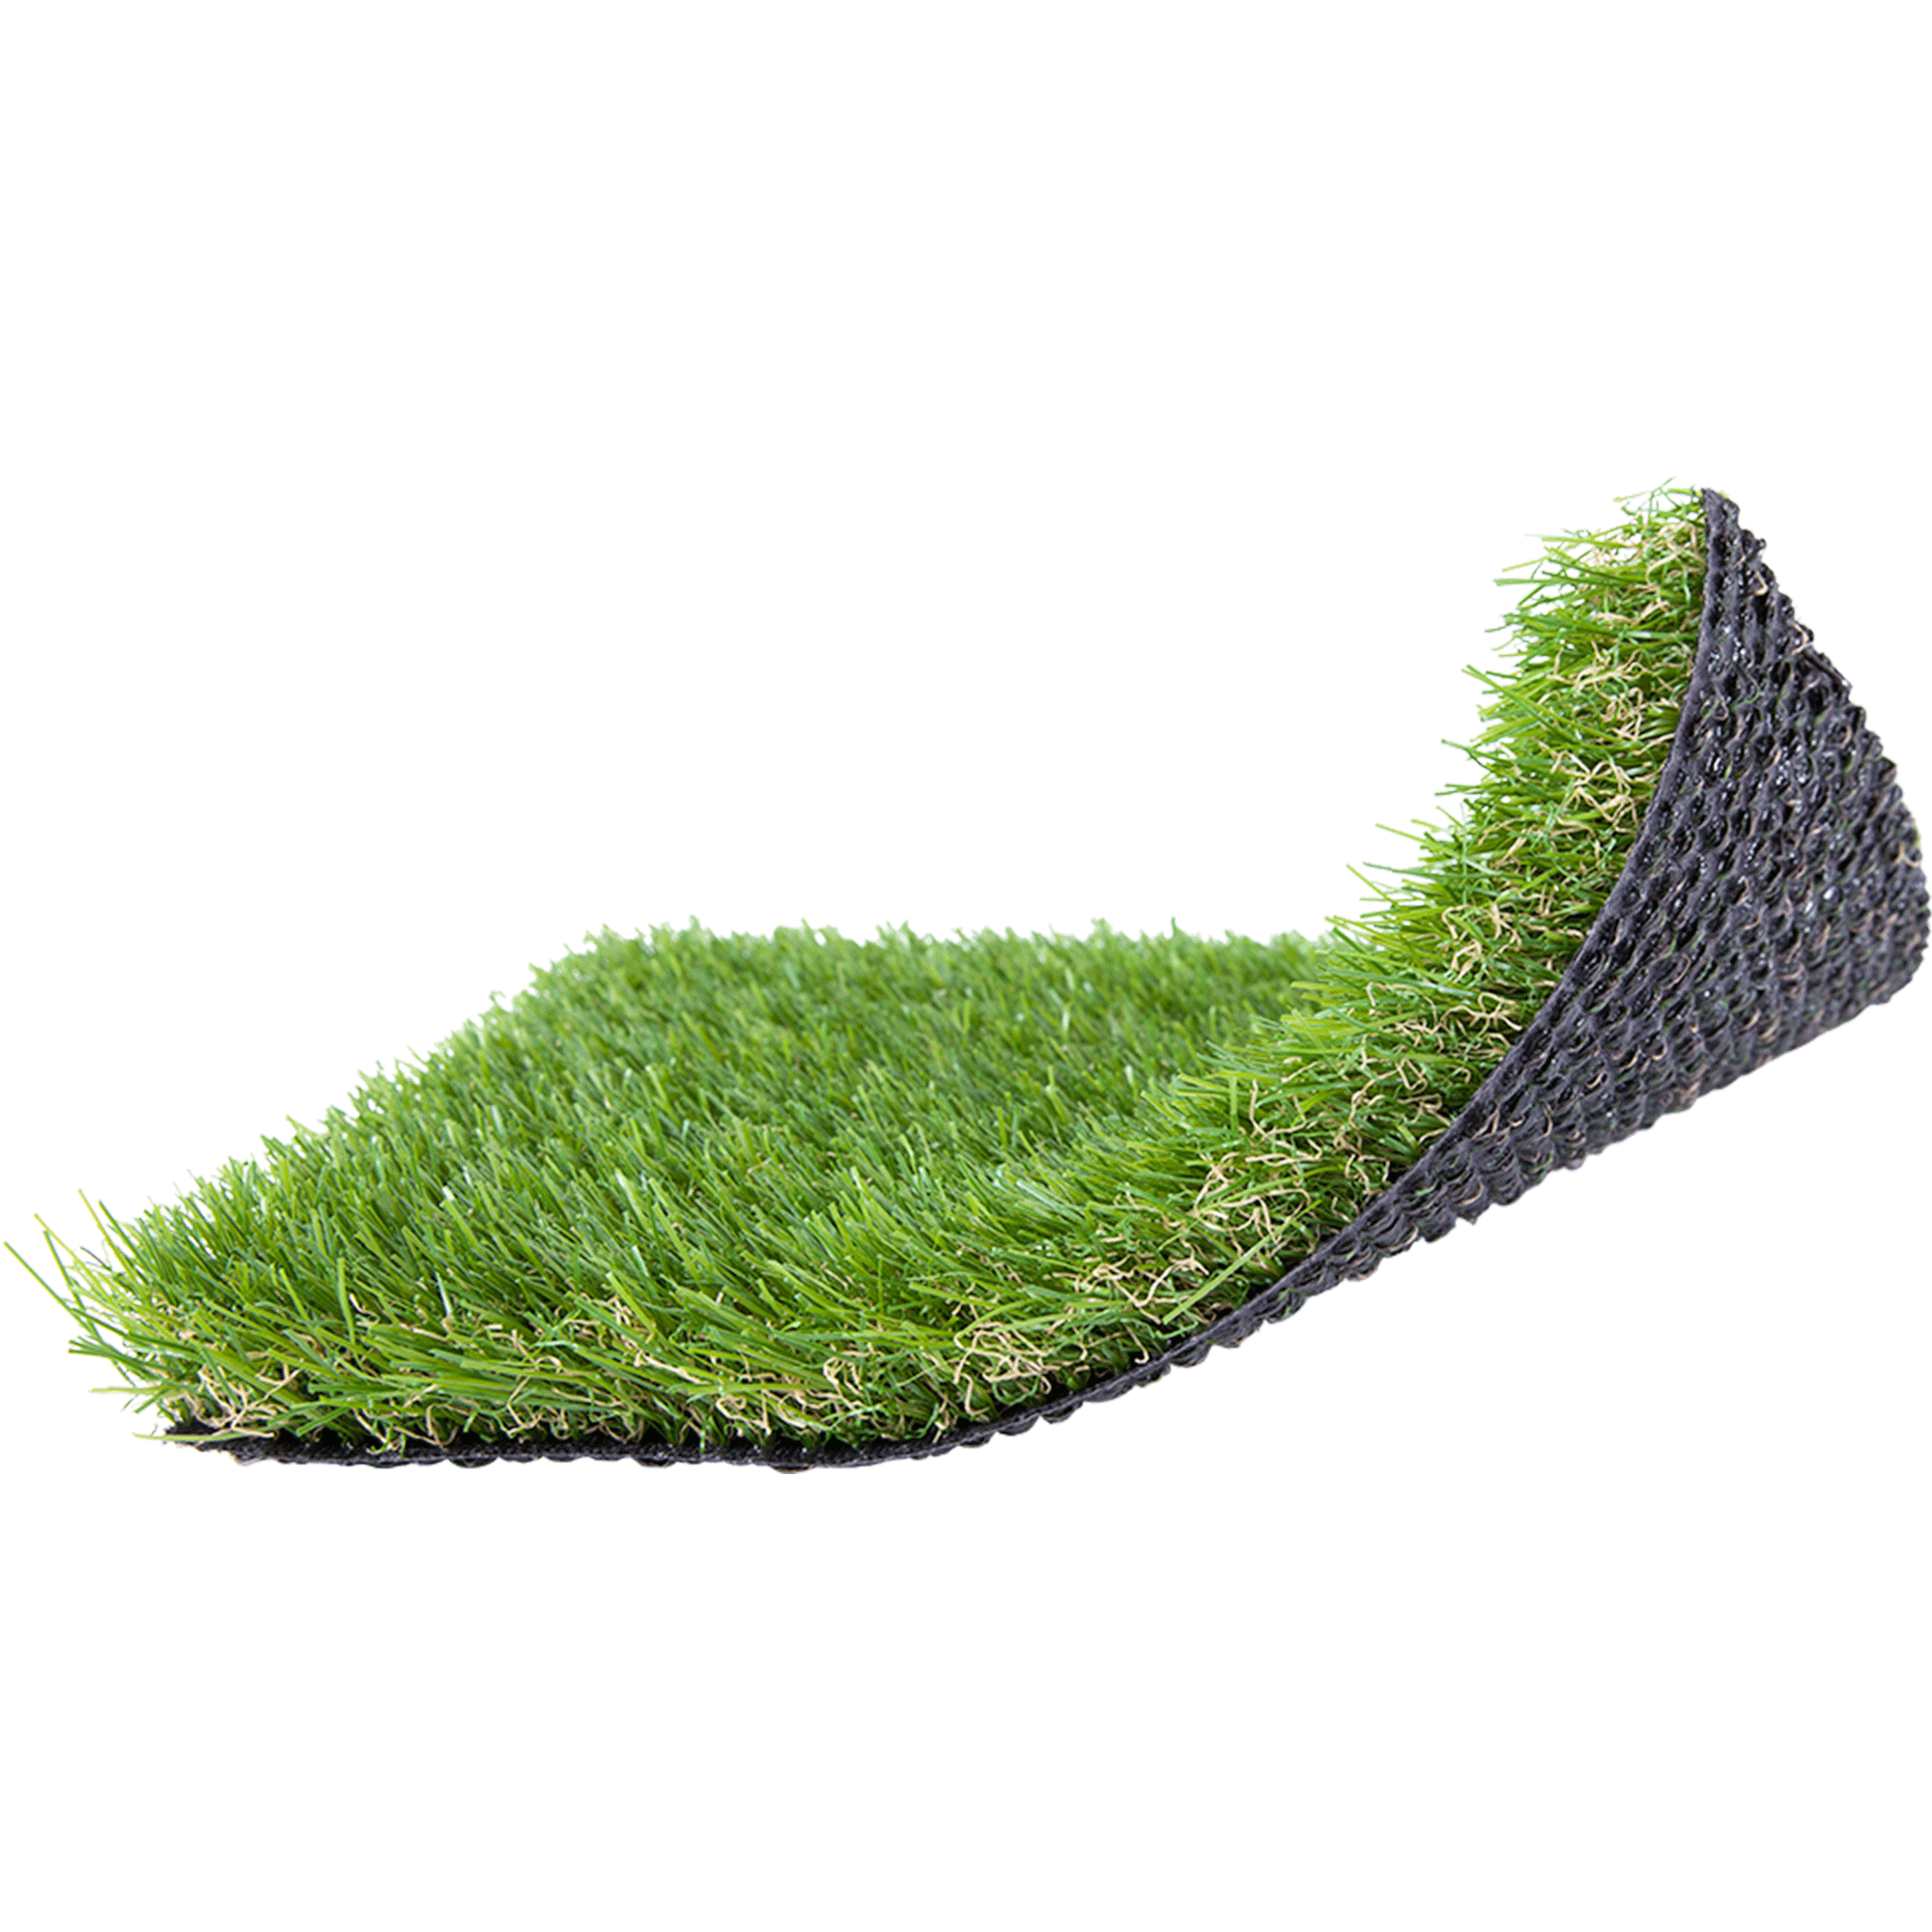 MegaLawn Artificial Lawn Grass | Synthetic Lawn Turf | MegaGrass